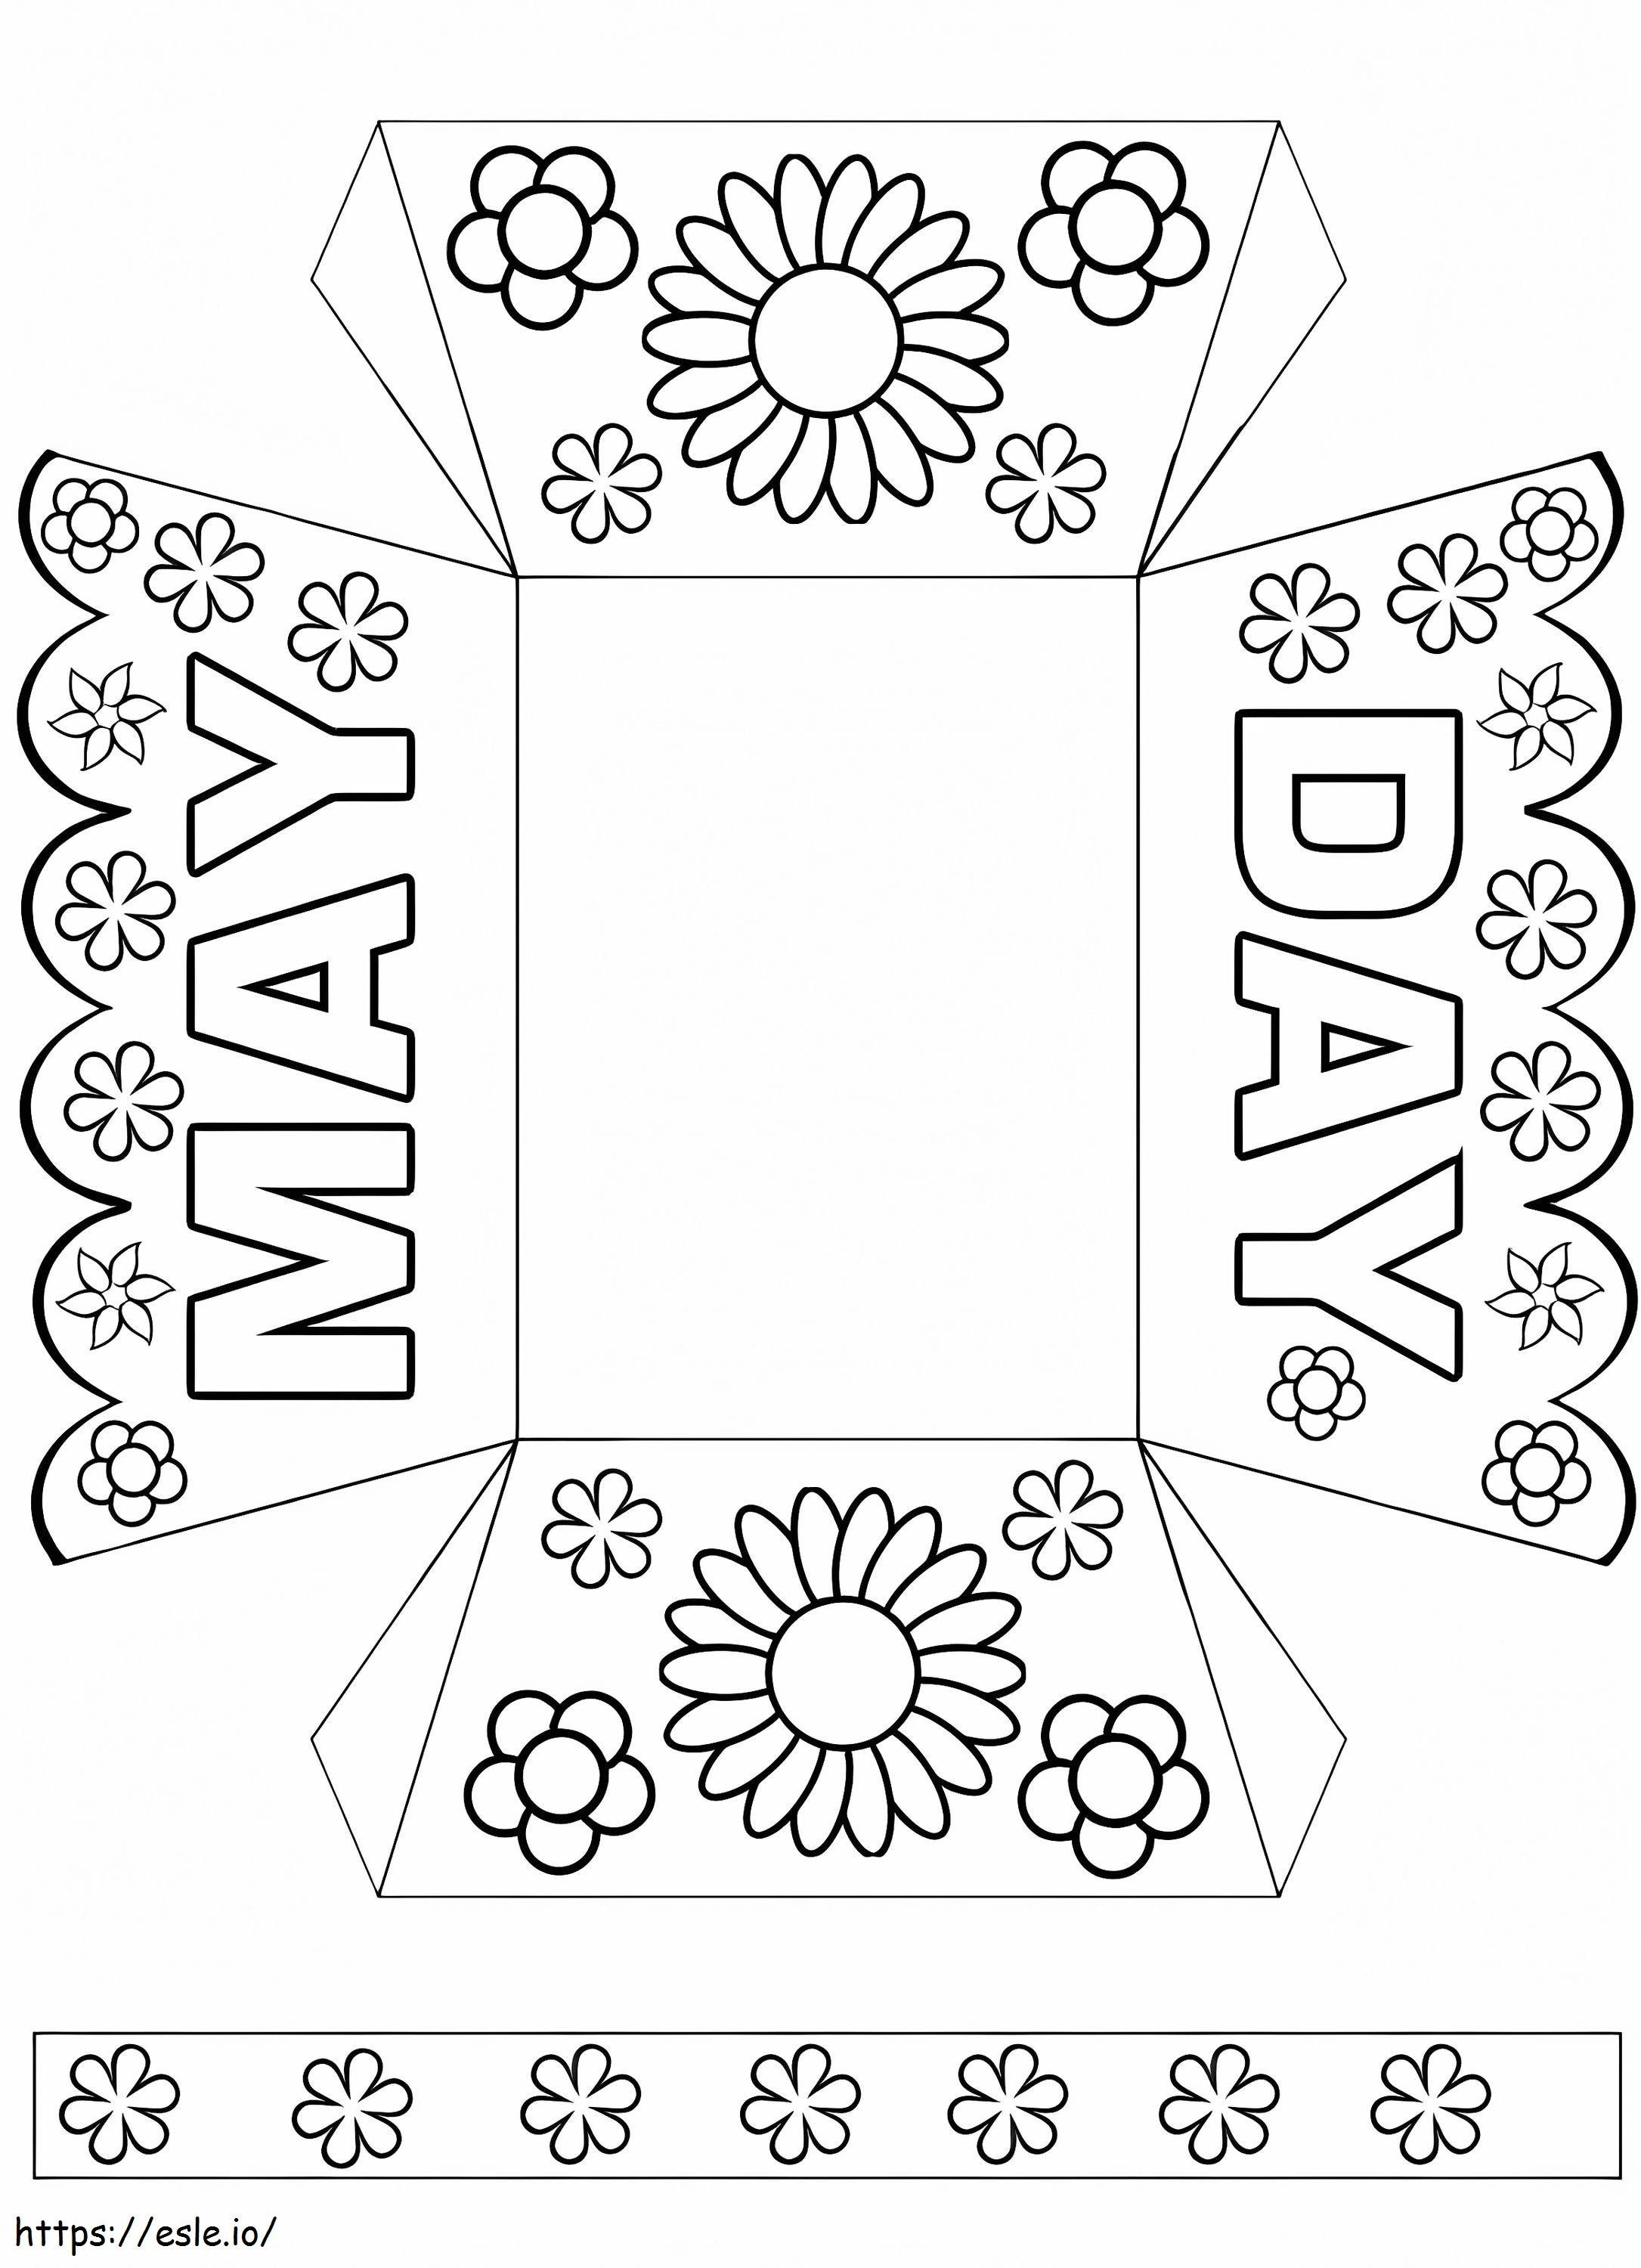 Color May Day coloring page